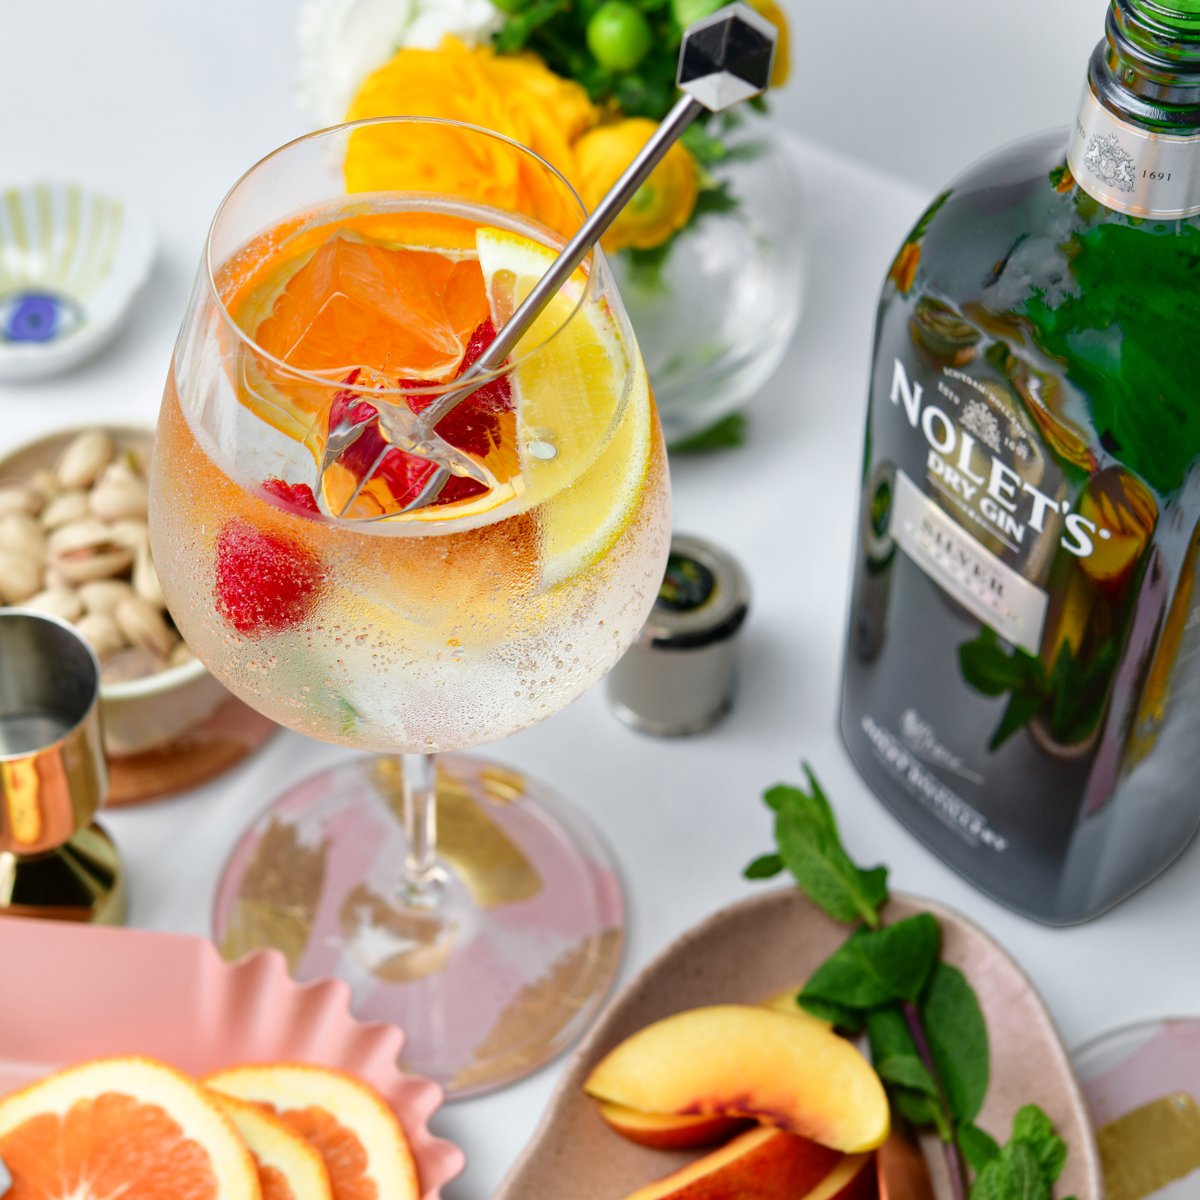 Signs of Spring = Spritz Szn! This one's garnished with unabashed enthusiasm! * please share your creations with us! Get the Botanical Spritz recipe from our websites Recipe section. #NOLETS #Spritz #SpritzSeason #Botanical #Cocktail #Recipe